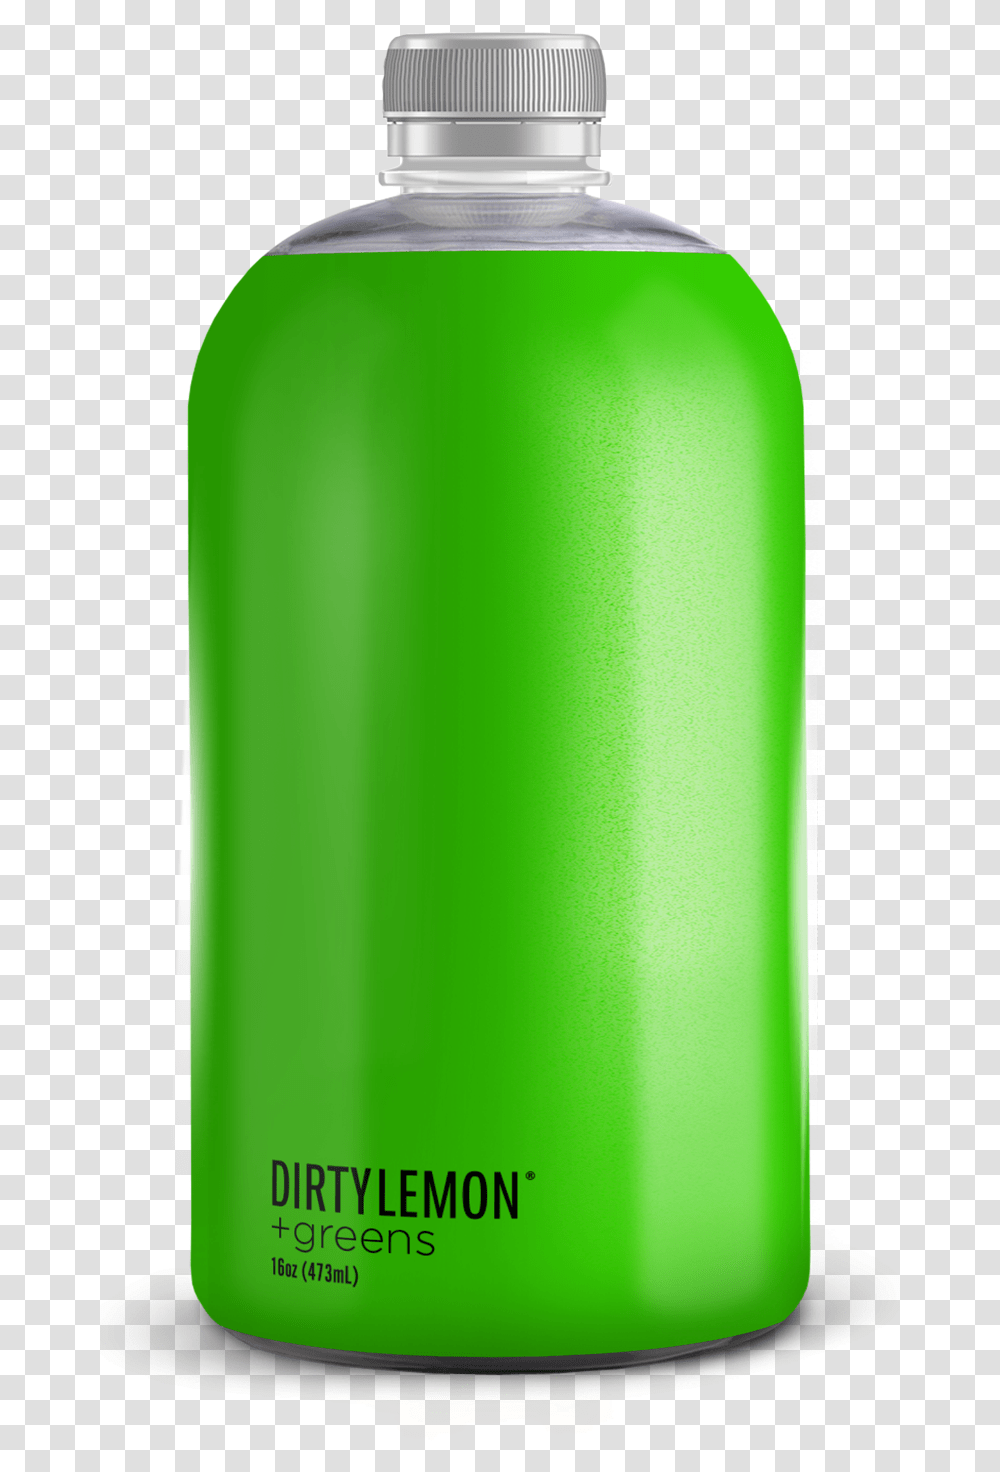 Greens Dirty Lemon Ginseng, Bottle, Mobile Phone, Electronics, Cell Phone Transparent Png